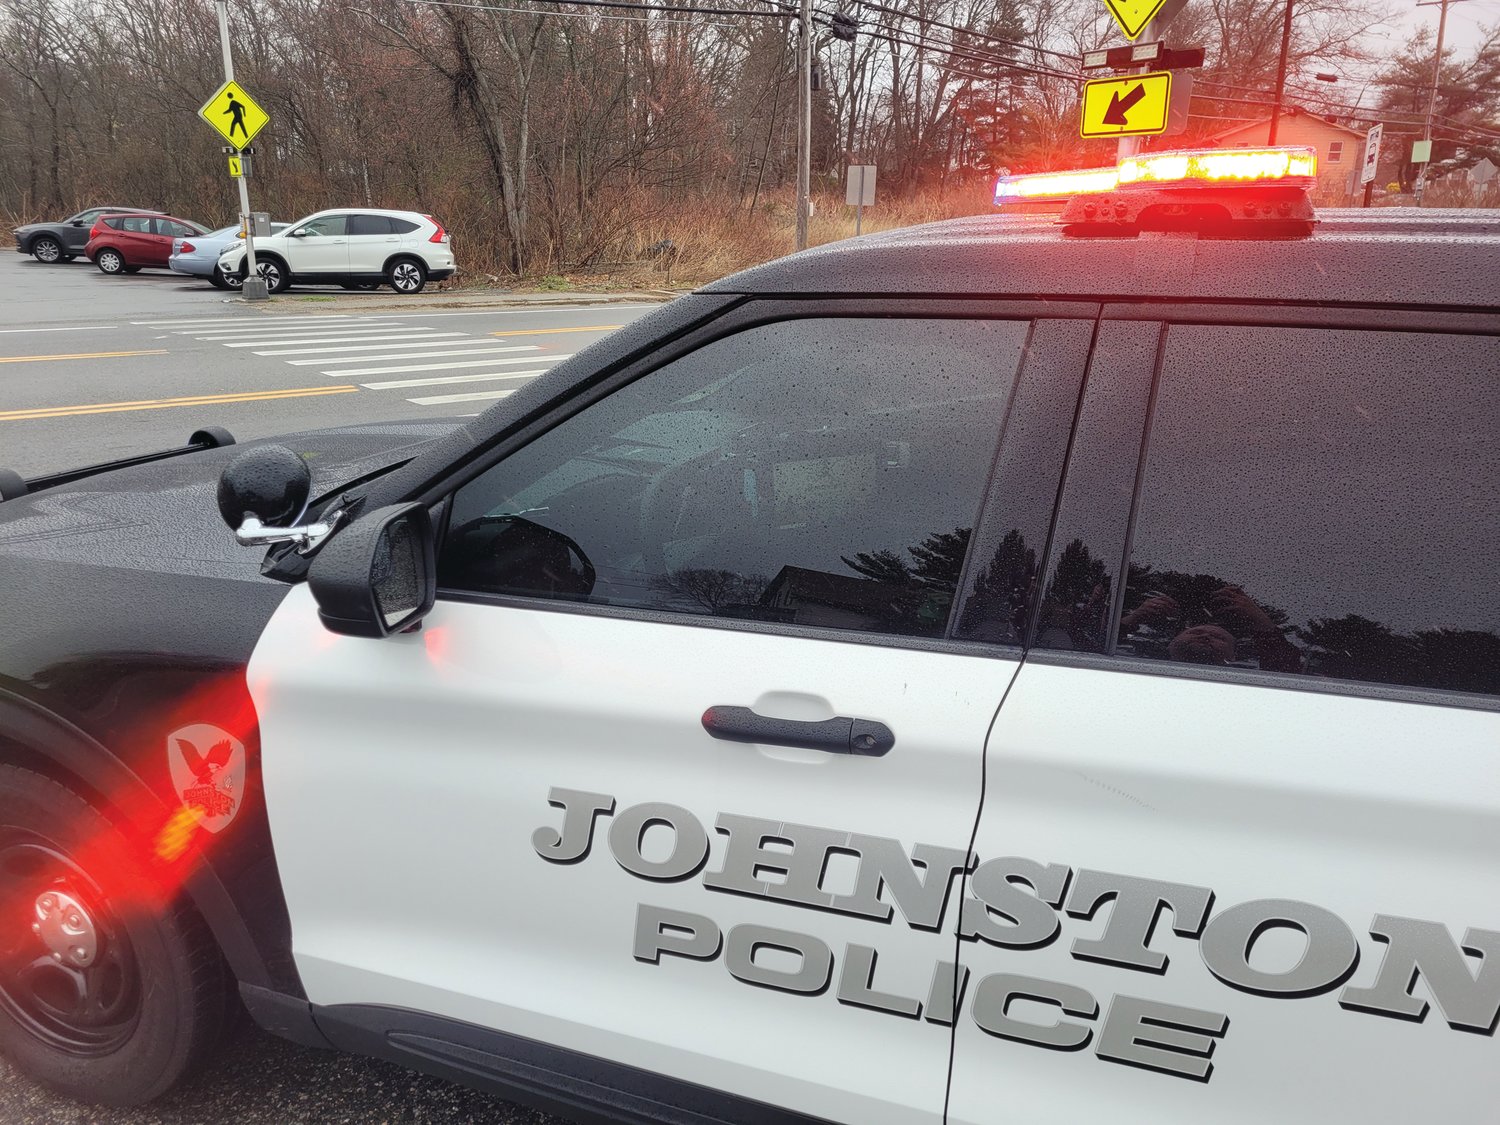 INCREASED PATROLS: Johnston Police will be “deploying additional patrols throughout the month sporadically,” according to Chief Joseph P. Razza. Local police are teaming up with state and federal agencies to spread the message that there are no excuses for driving impaired.